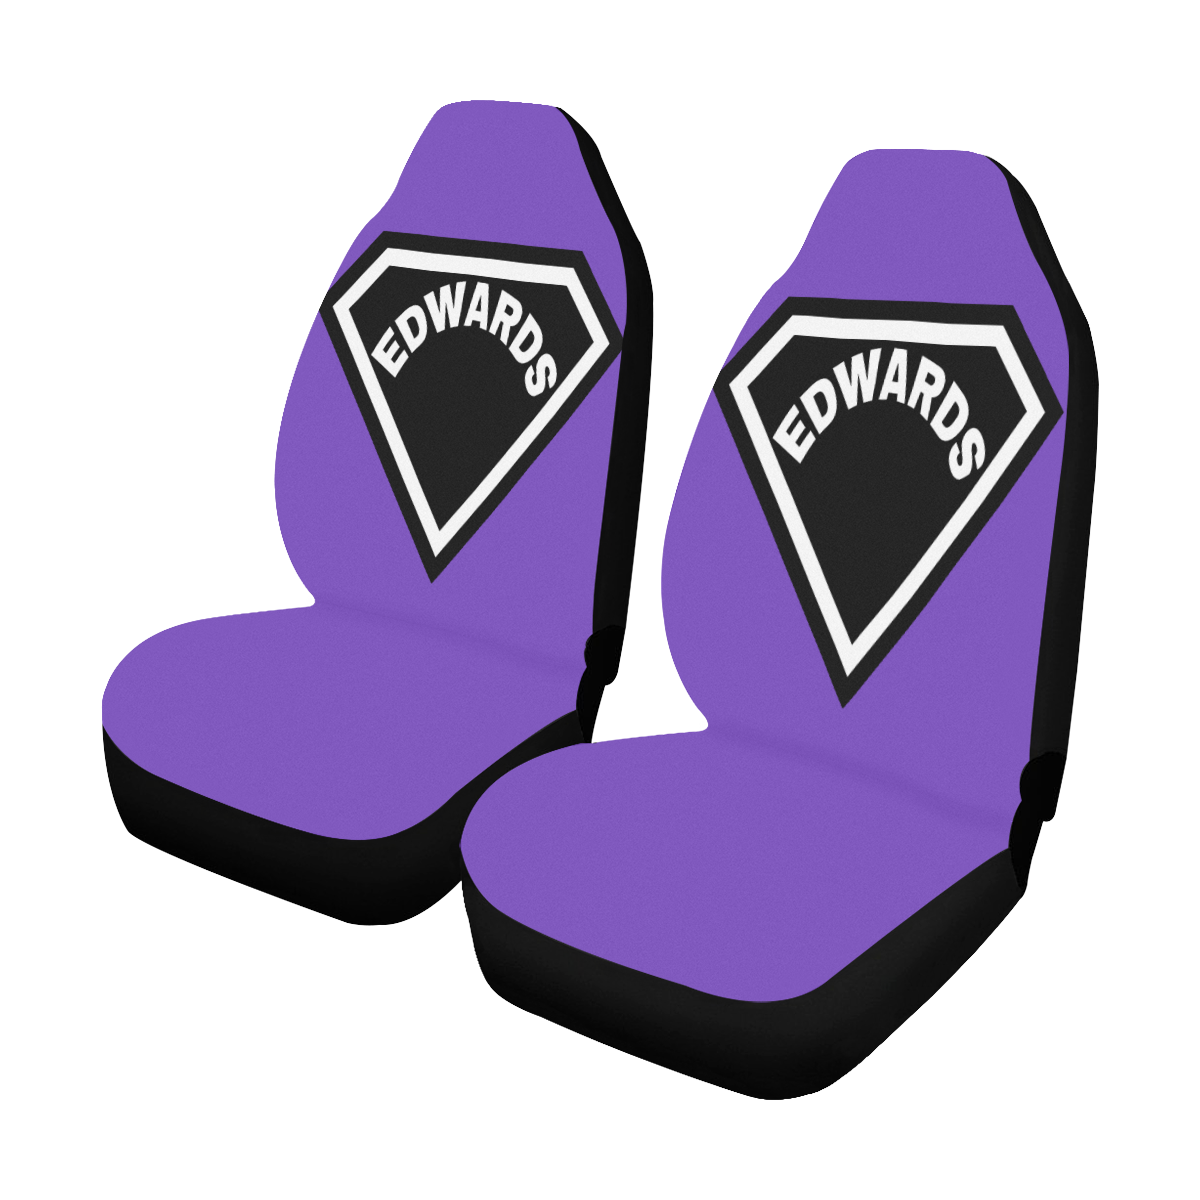 Personalized Edwards purple Car Seat Covers (Set of 2)